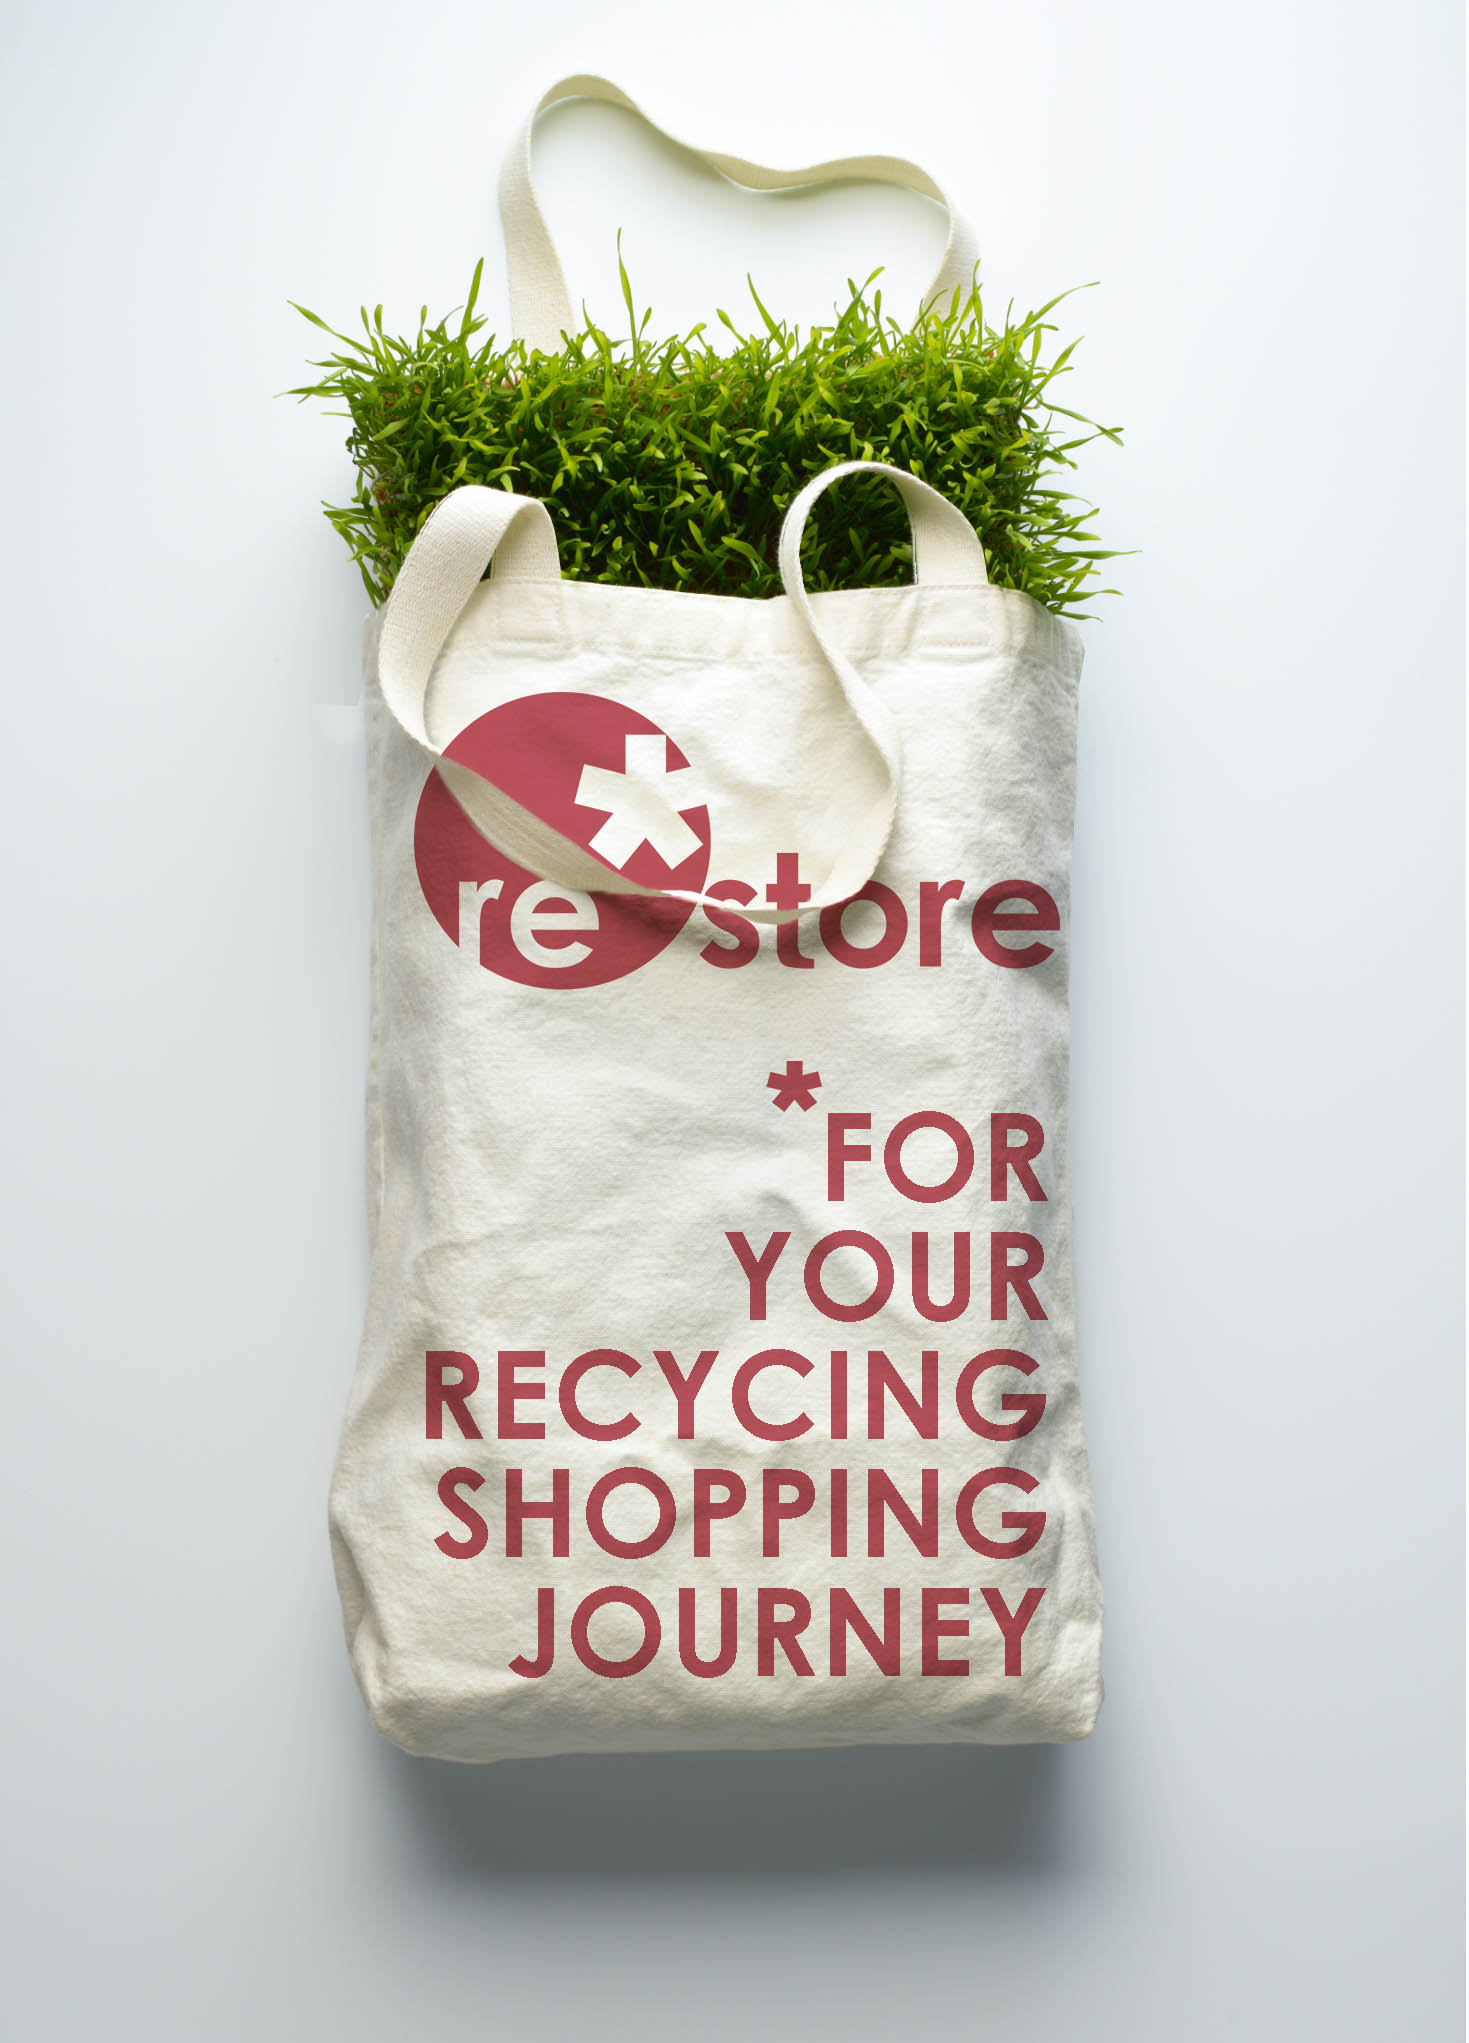 Brand launch and teaser campaign for Restore